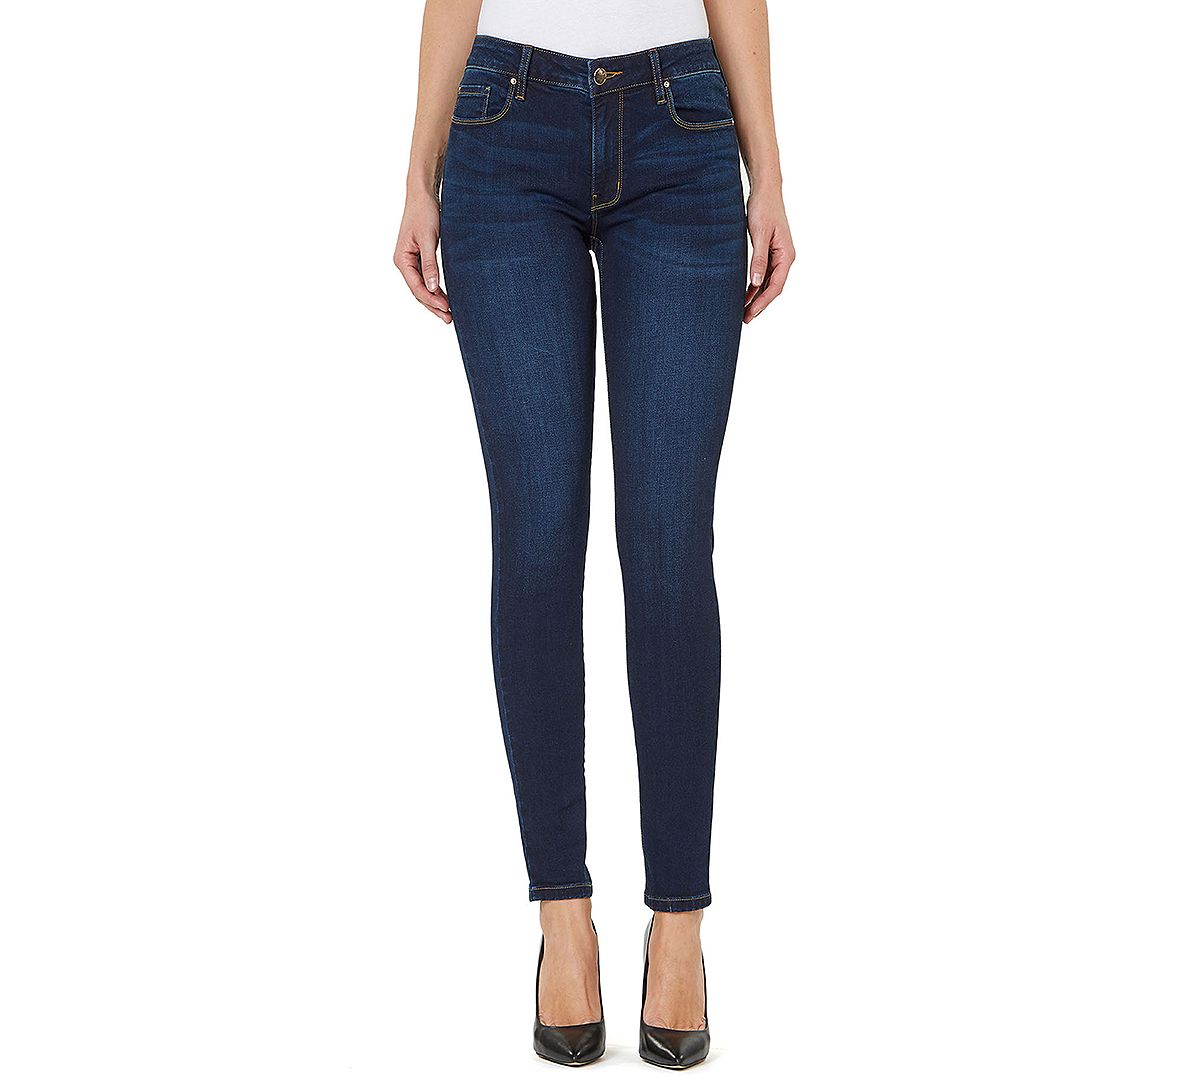 Numero Mid-rise Skinny Ankle Jeans Dark Wash